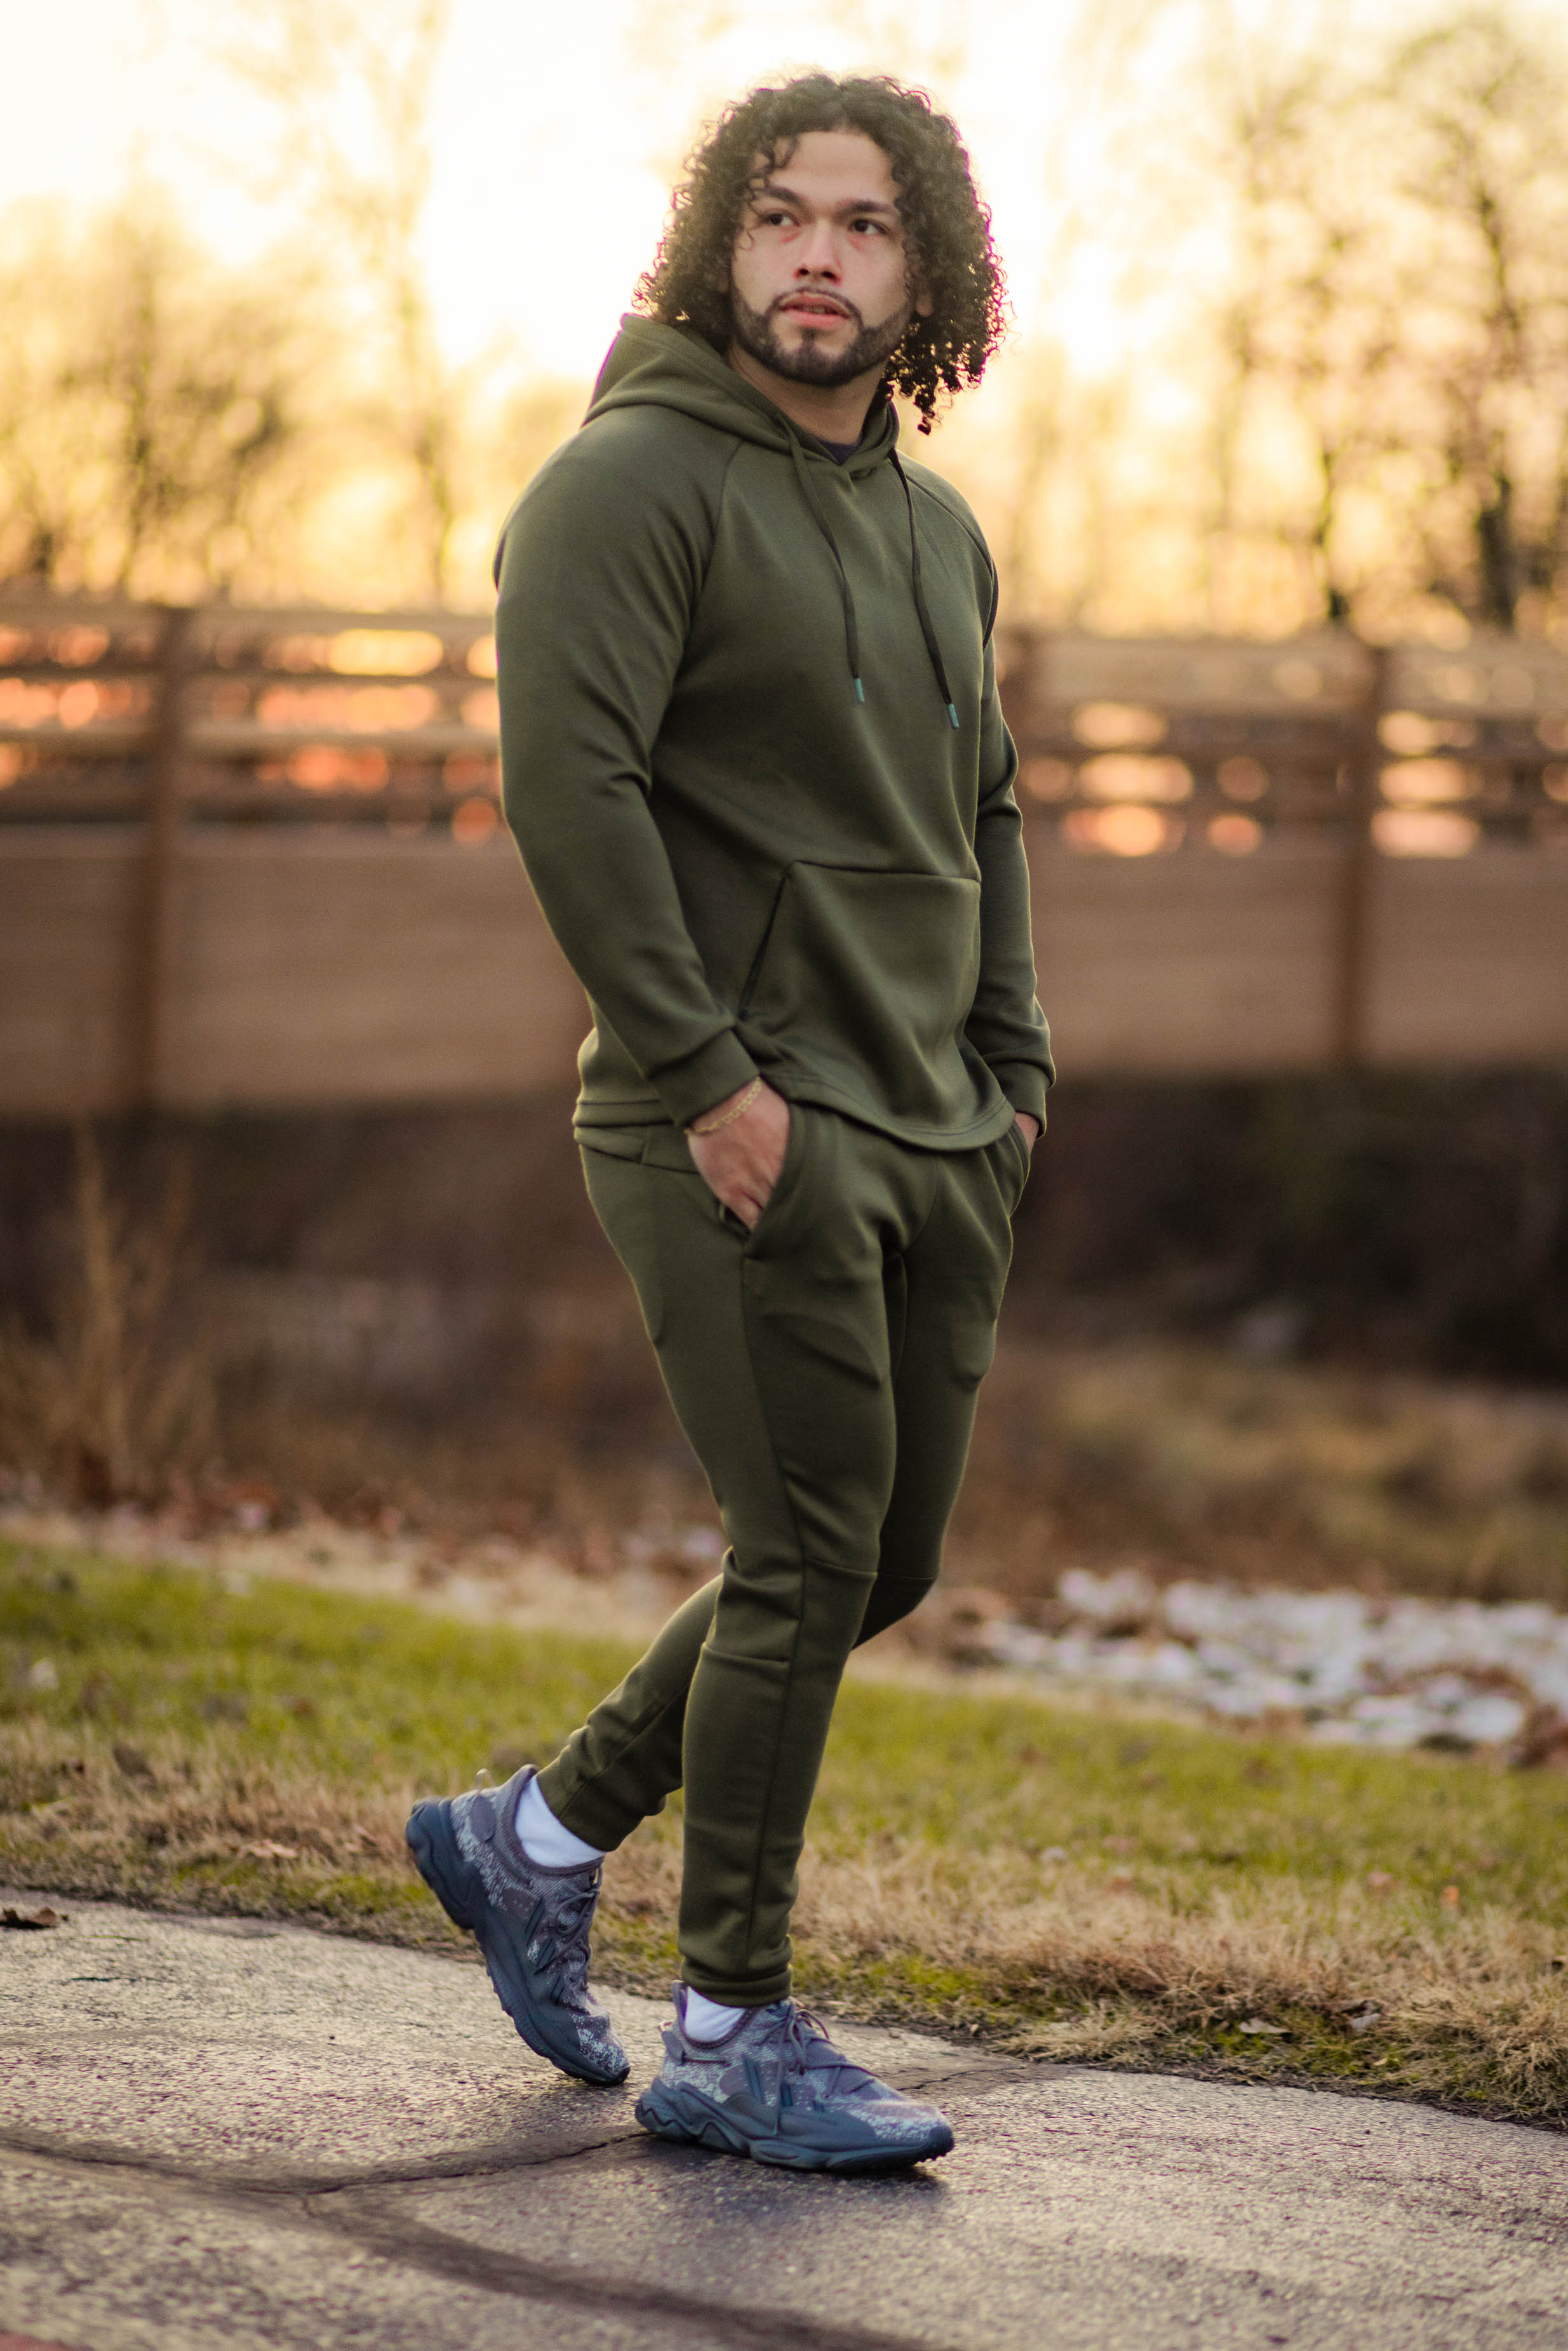 Clearance Clothing Under $10,POROPL Summer Casual Athletic Cargo